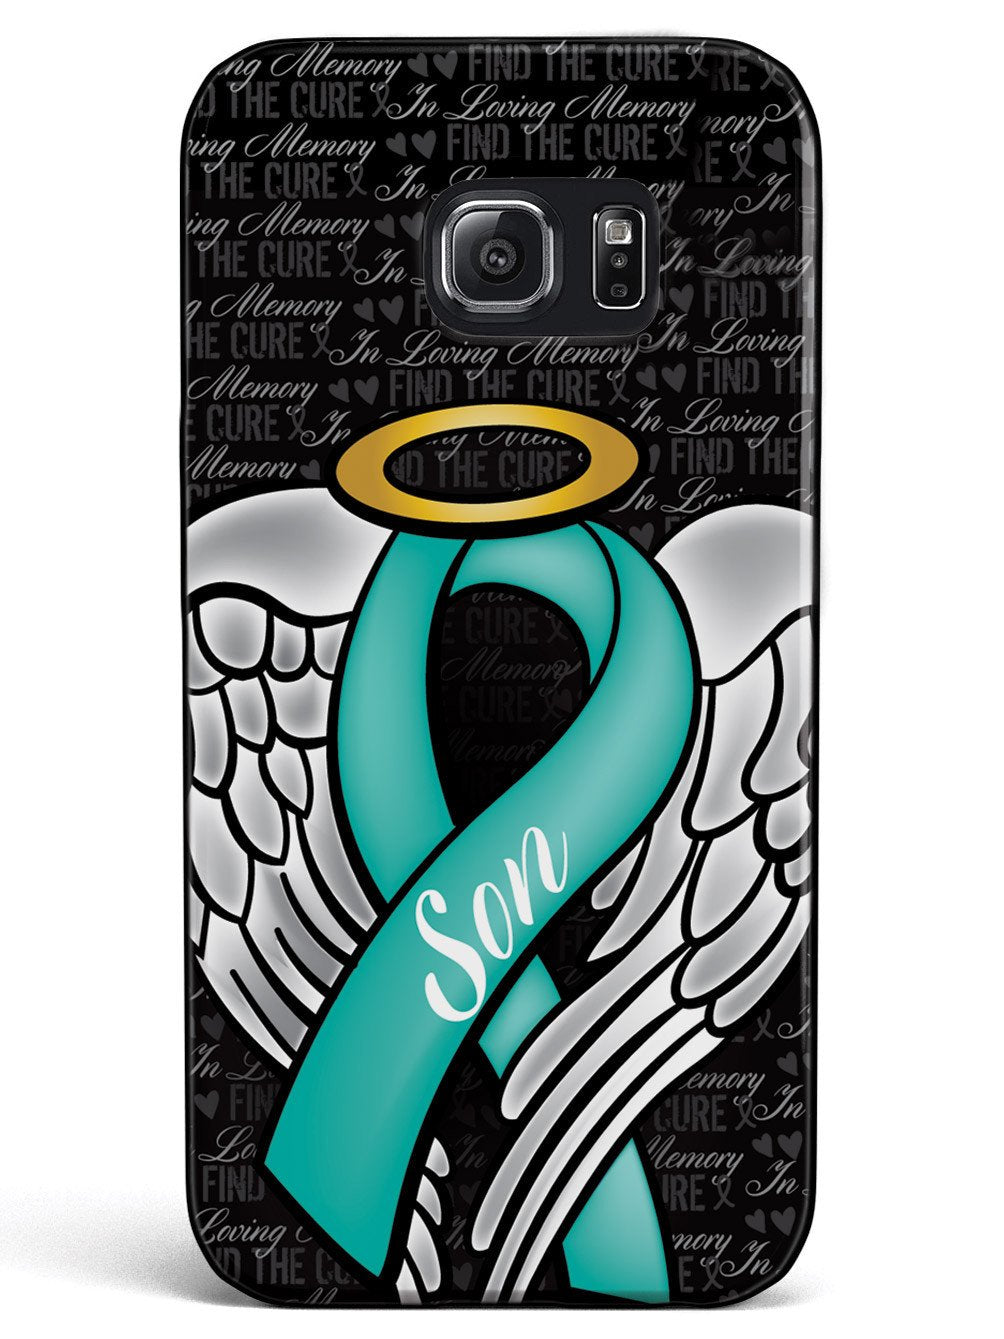 In Loving Memory of My Son - Teal Ribbon Case